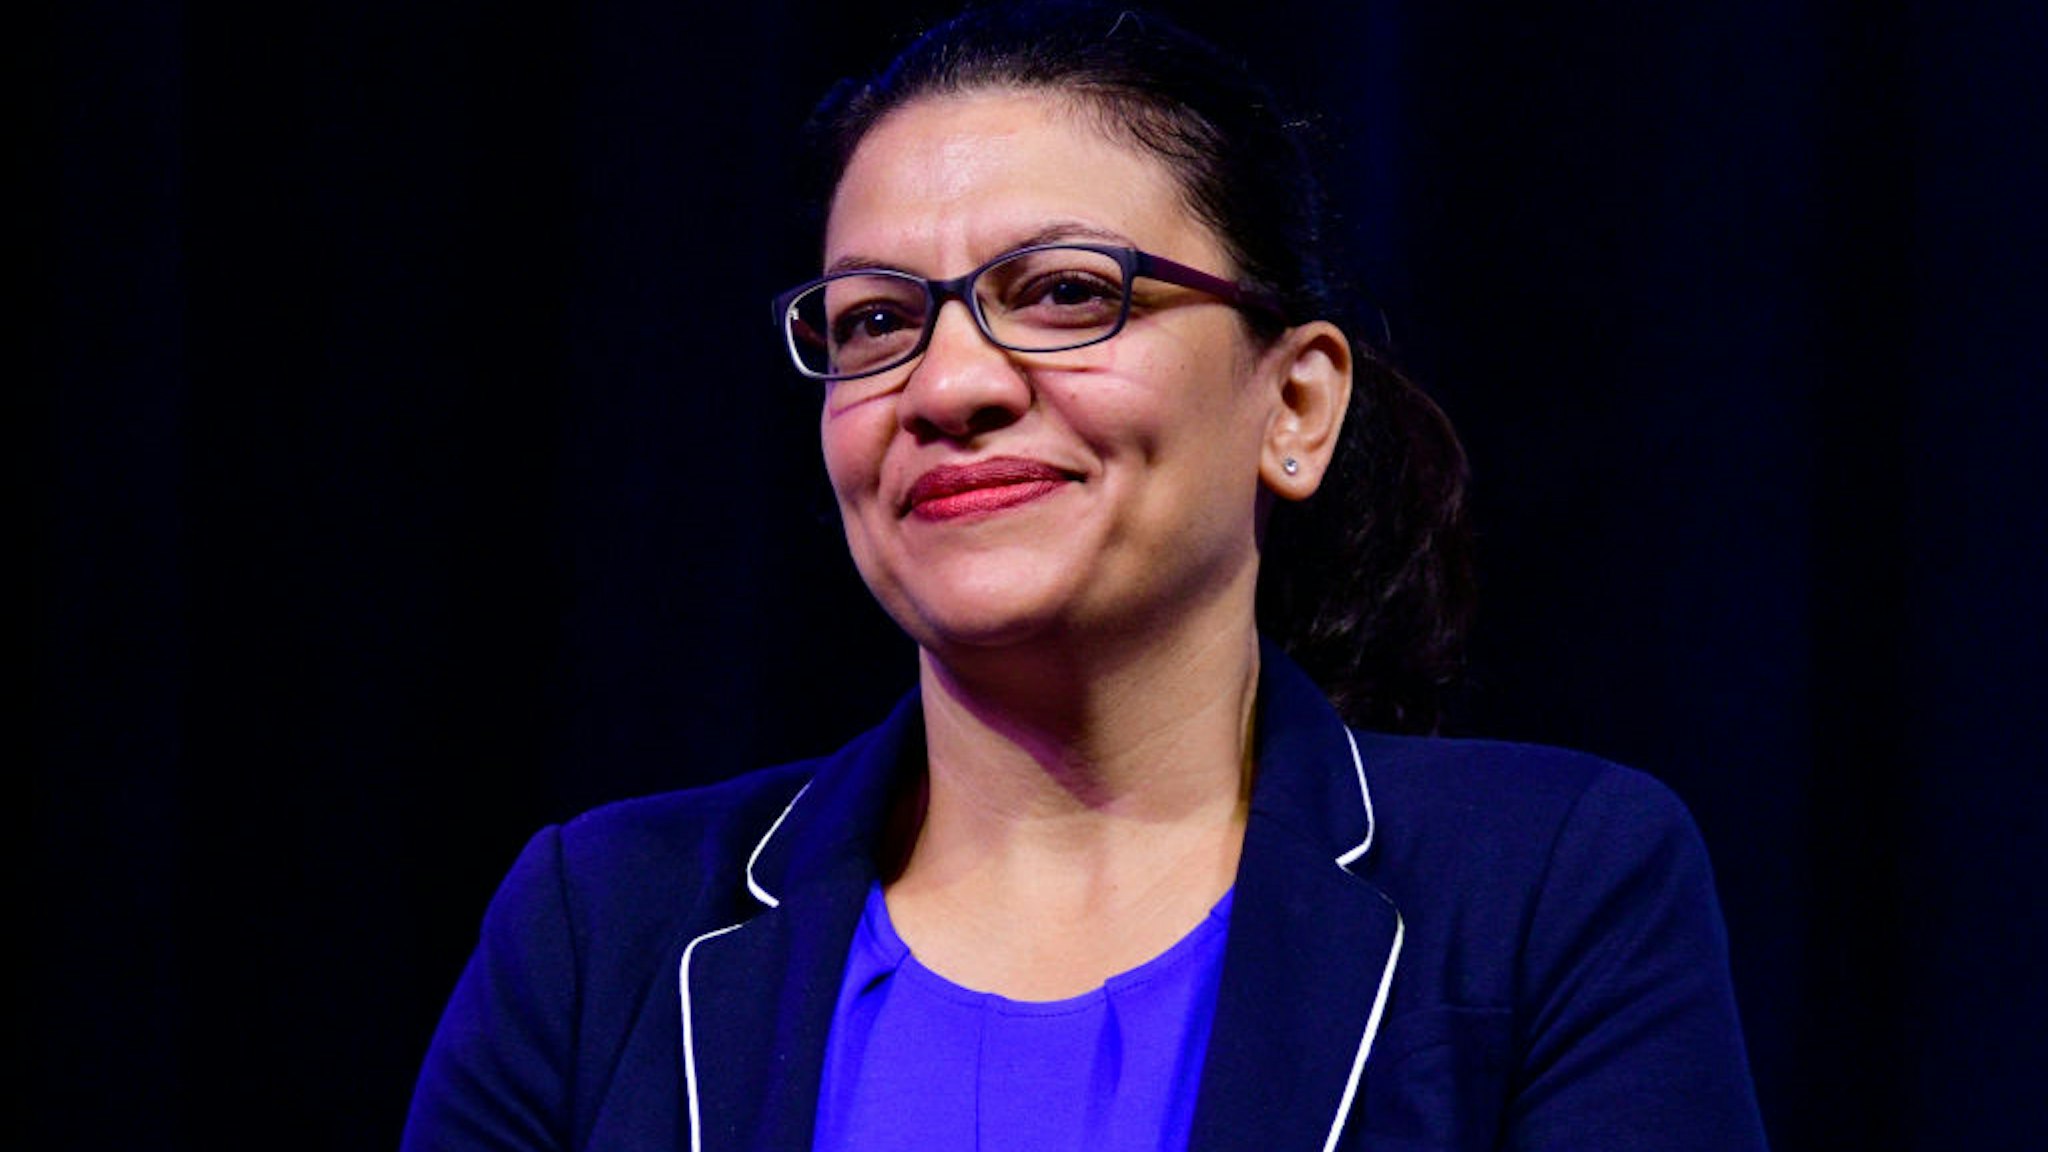 Rep. Rashida Tlaib (D-MI) takes part in a panel discussion led by Aimee Allison